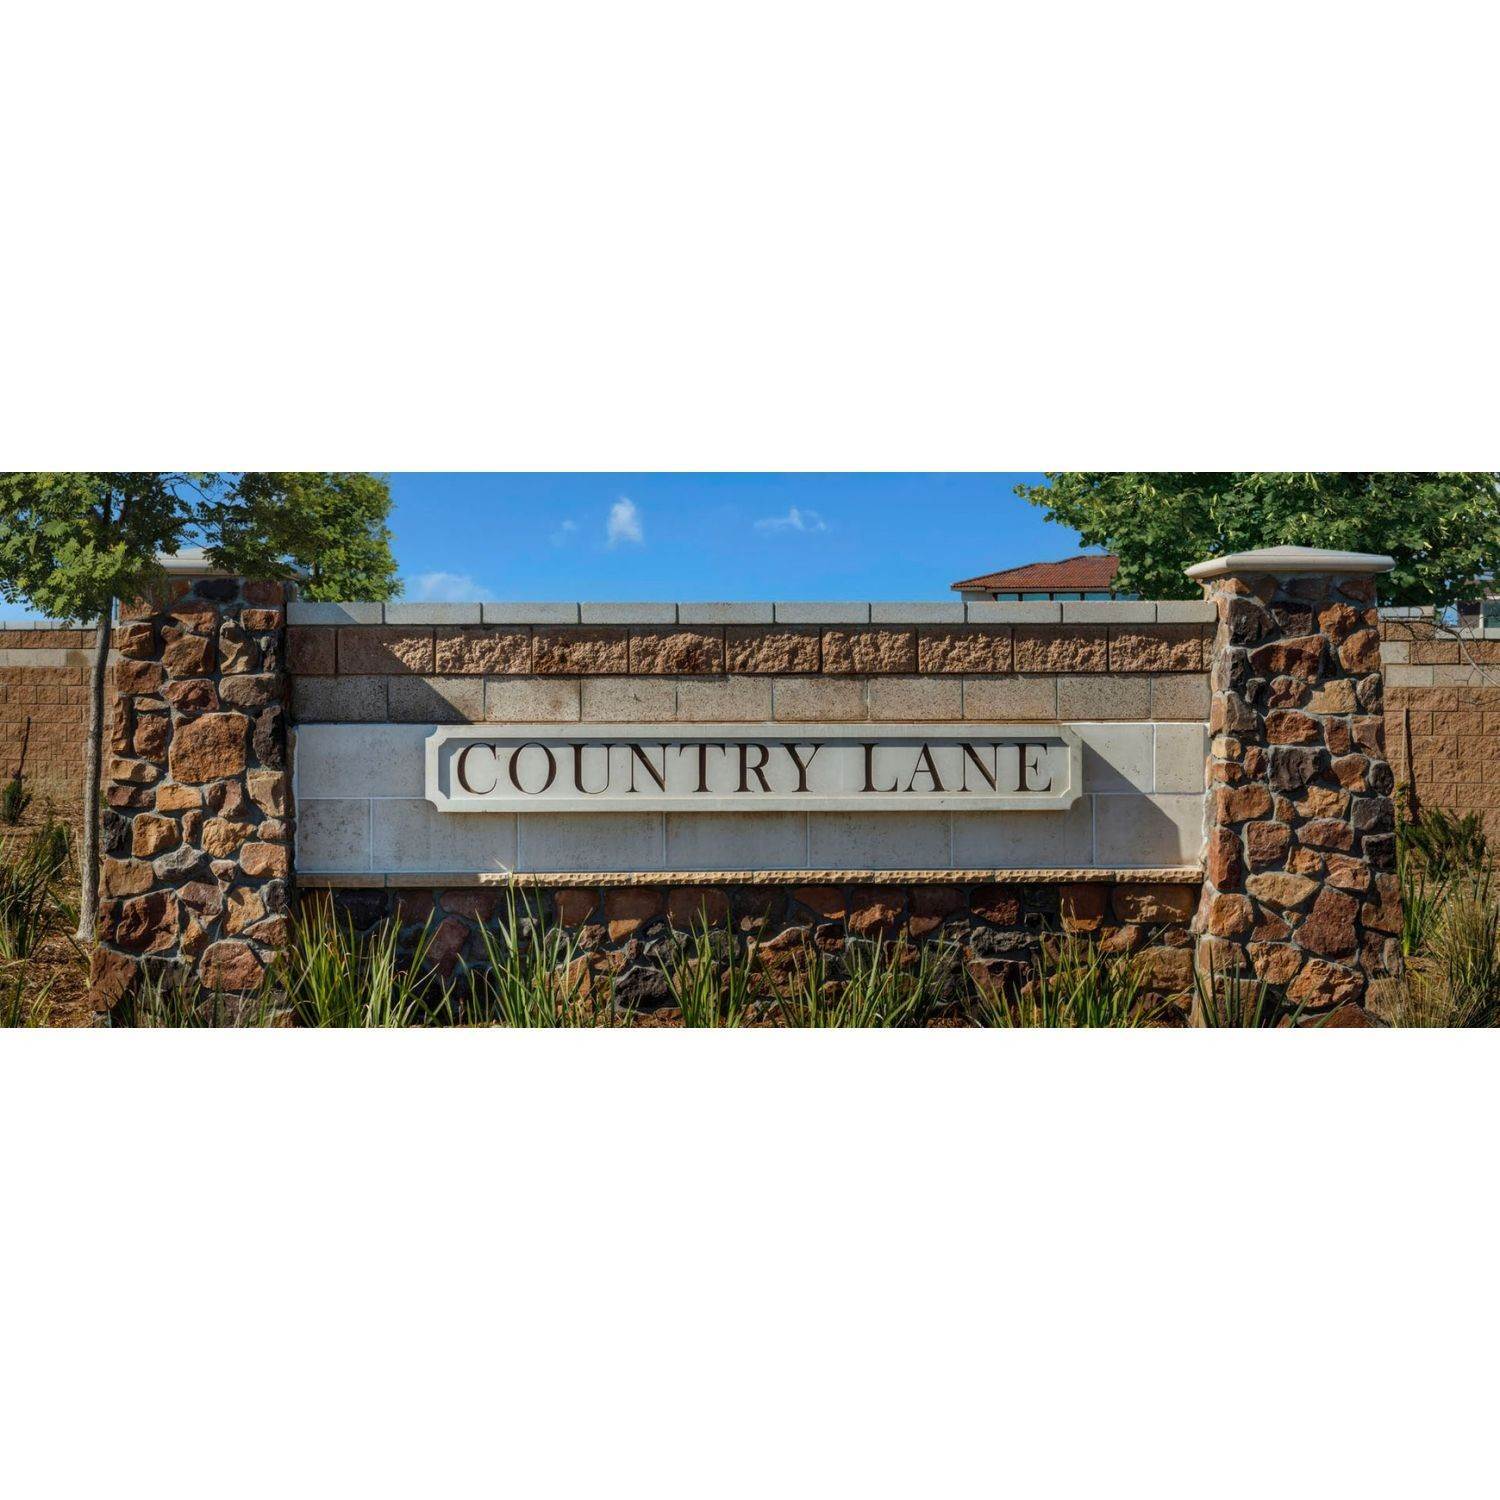 2. Country Lane - Whispering Wind building at 2651 S Brockram Drive, Ontario, CA 91761